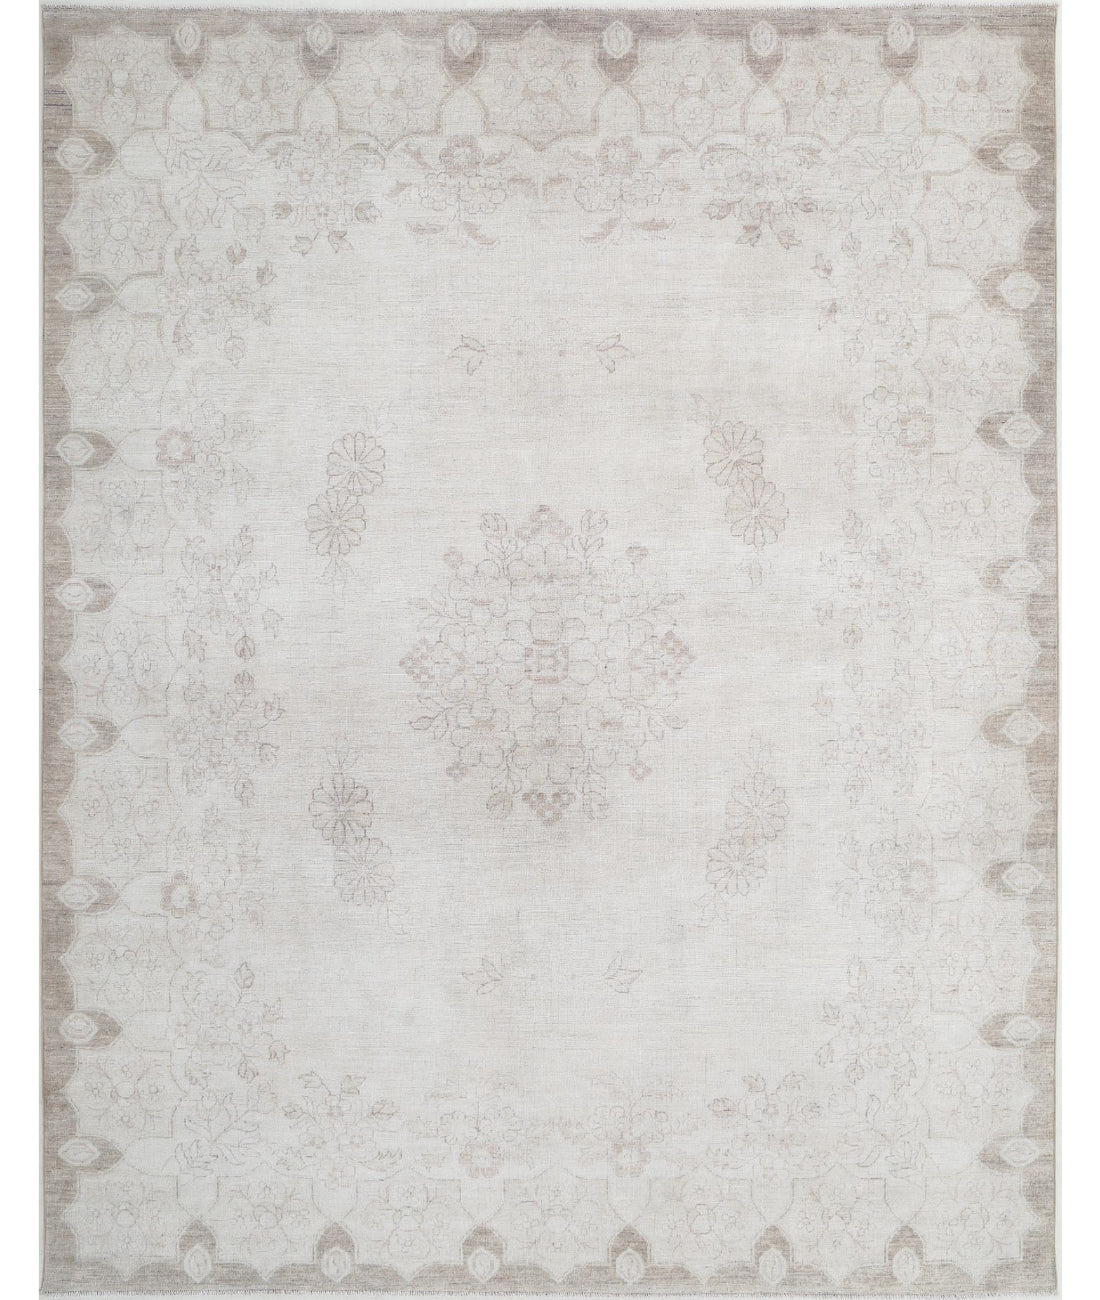 Hand Knotted Serenity Wool Rug - 7'10'' x 10'1'' 7'10'' x 10'1'' (235 X 303) / Ivory / Taupe